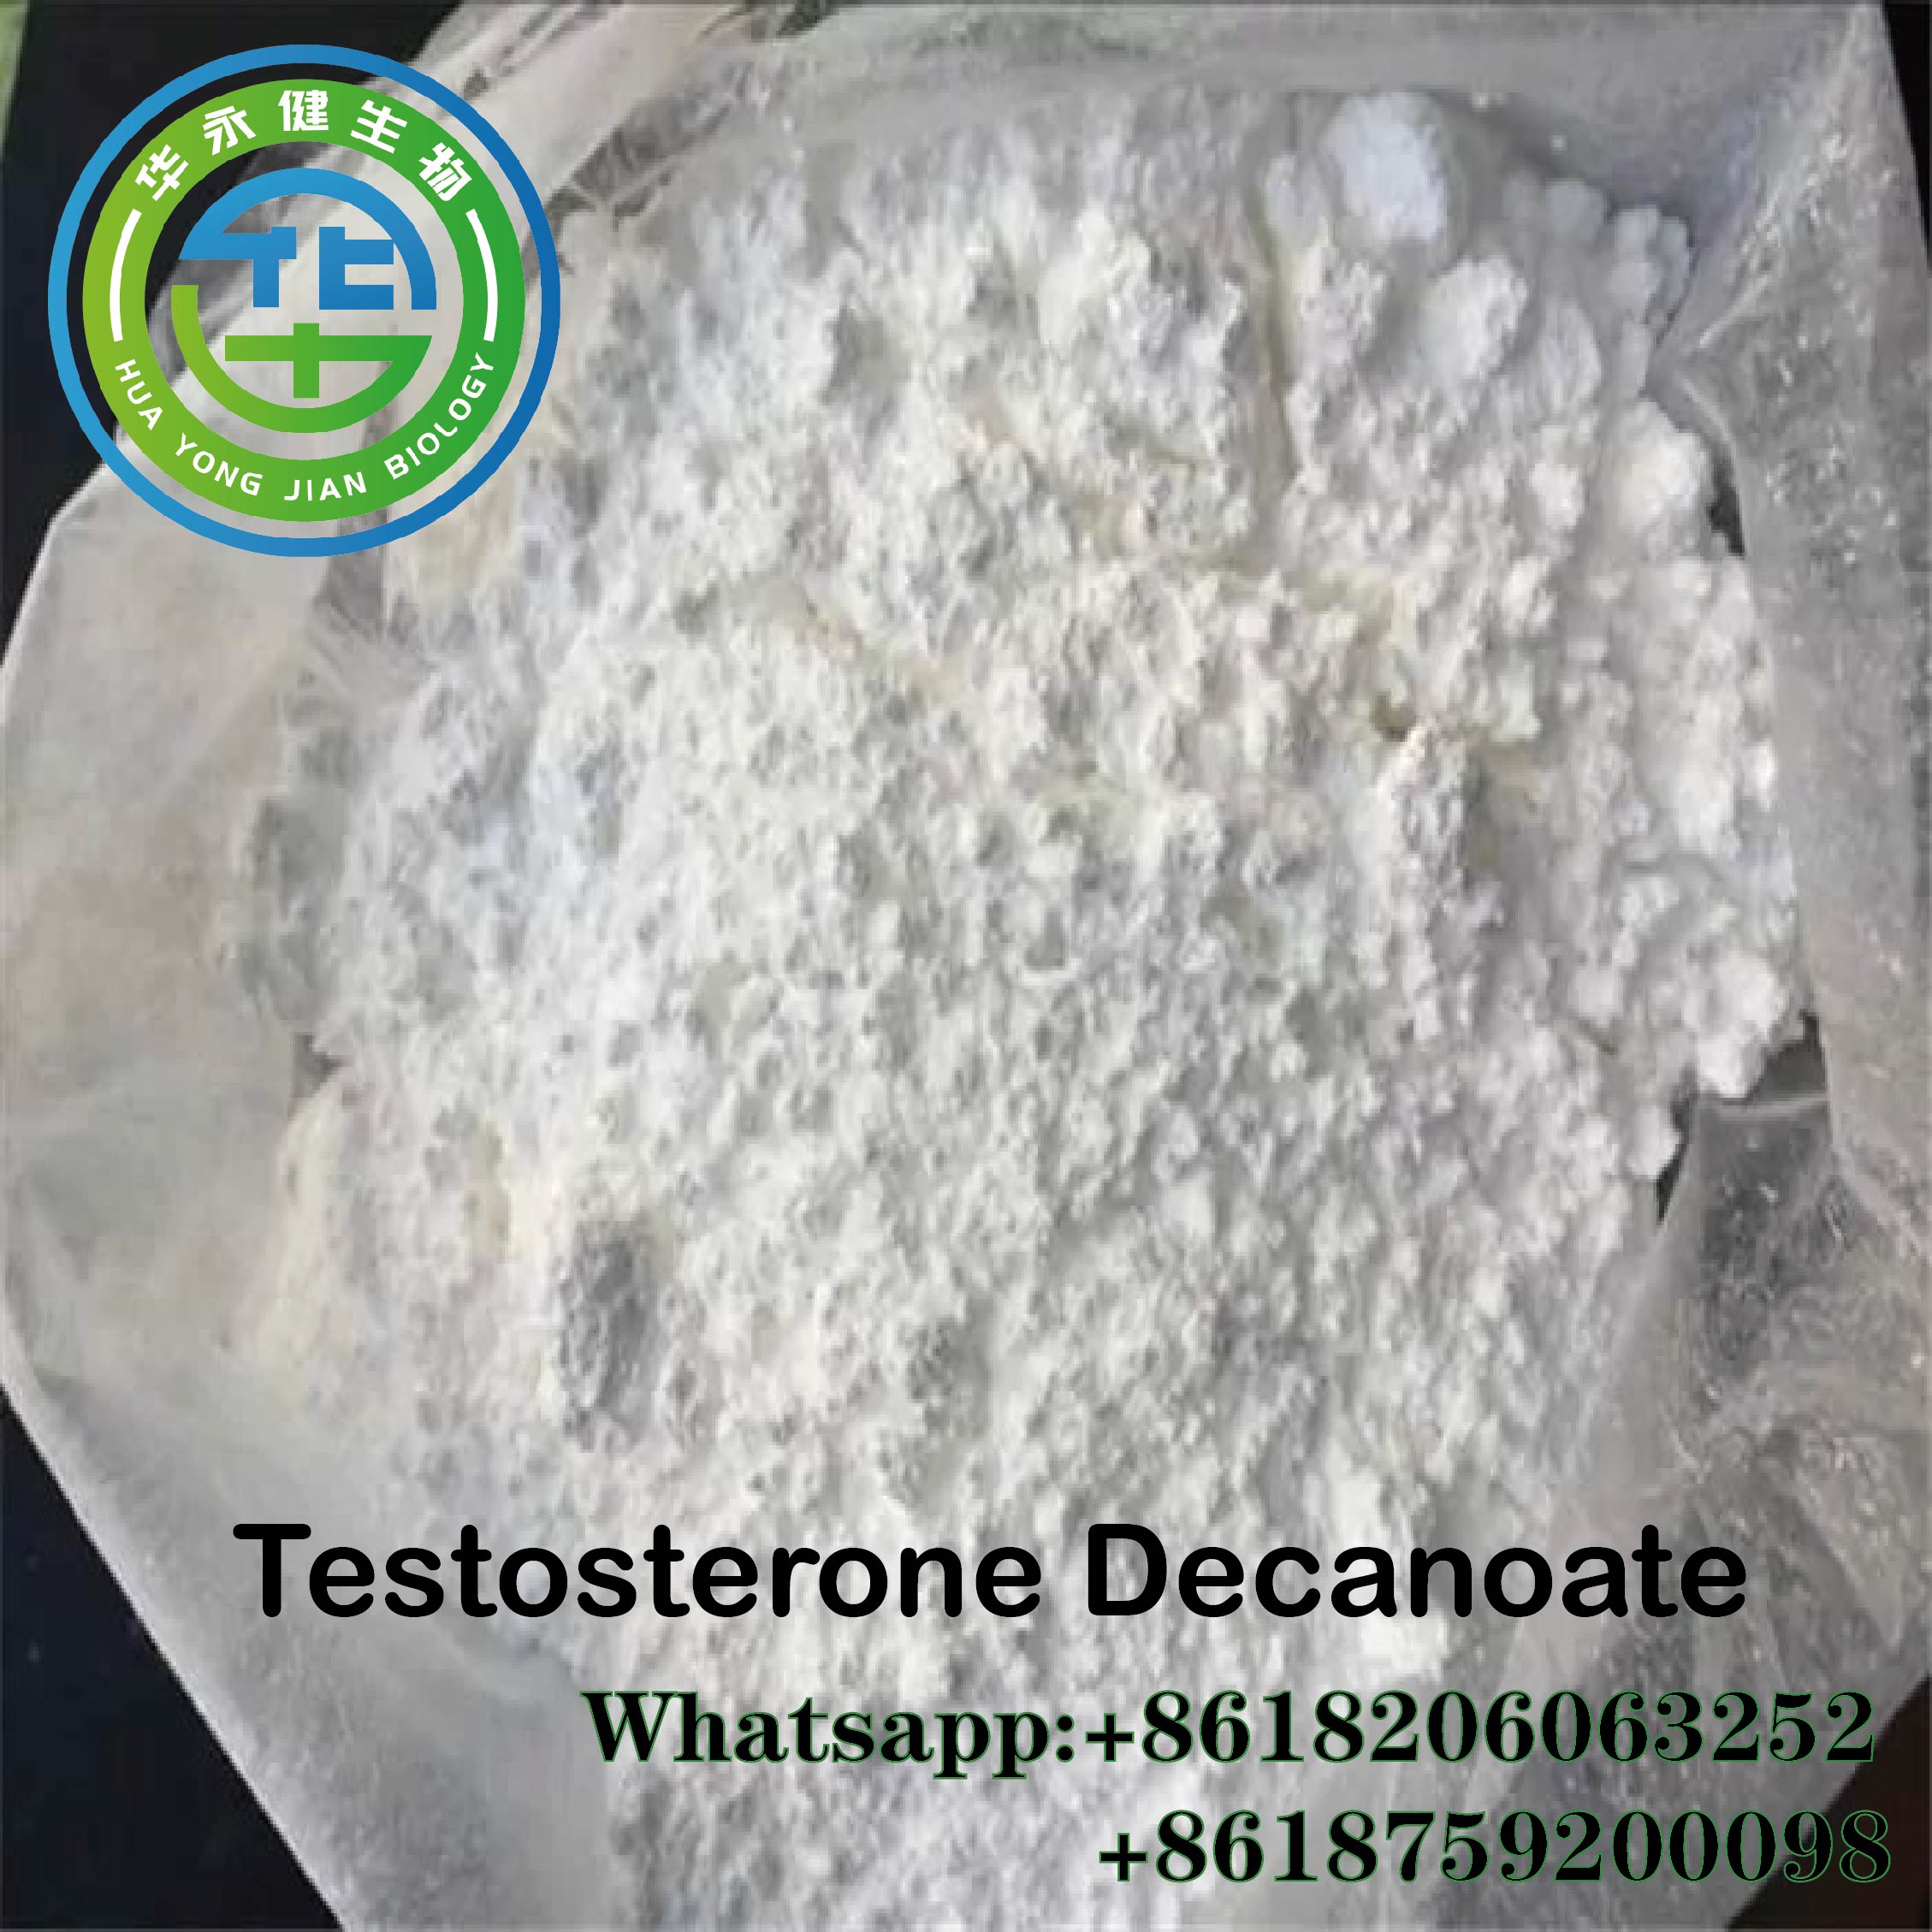 ​Test Decanoate High Purity Testosterone Decanoate Supplier With USA Canada Domestic Shipping Test D Powder CAS 5721-91-5